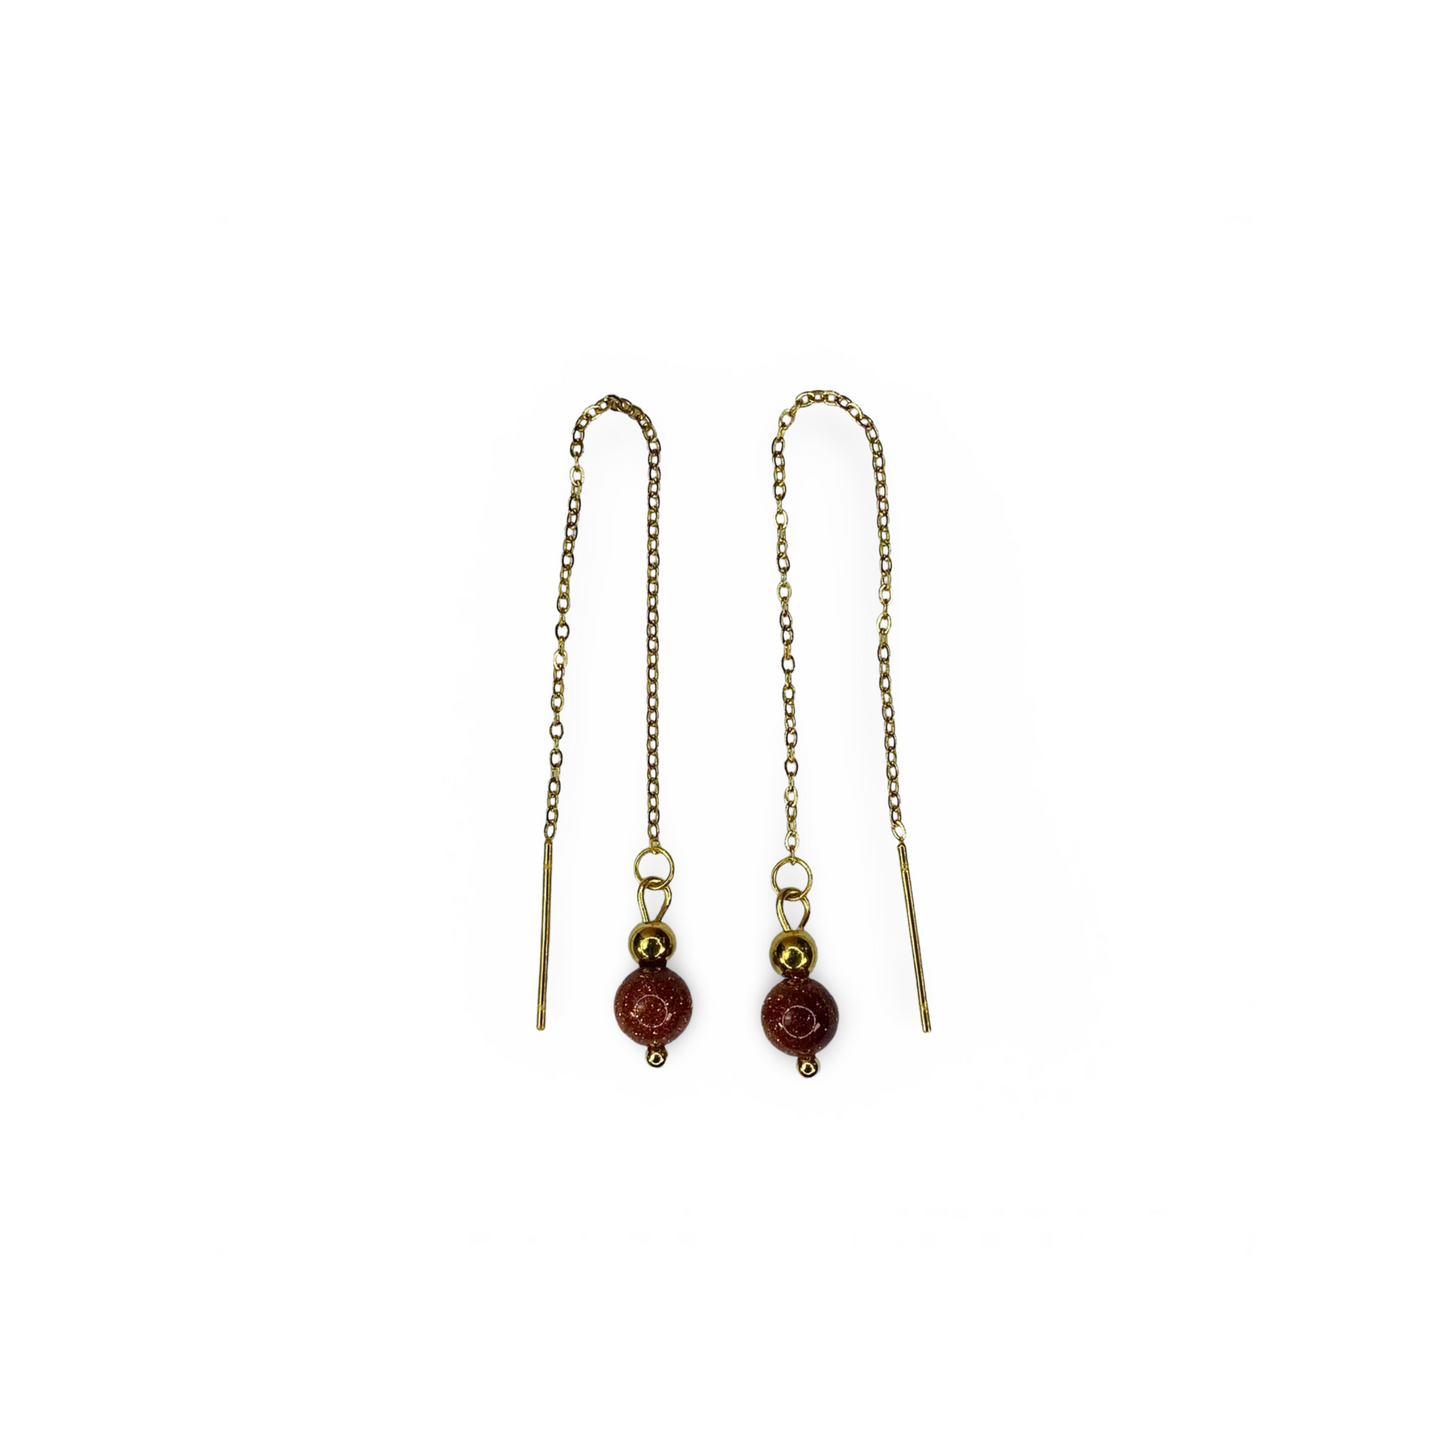 Chain Earrings with Goldstone